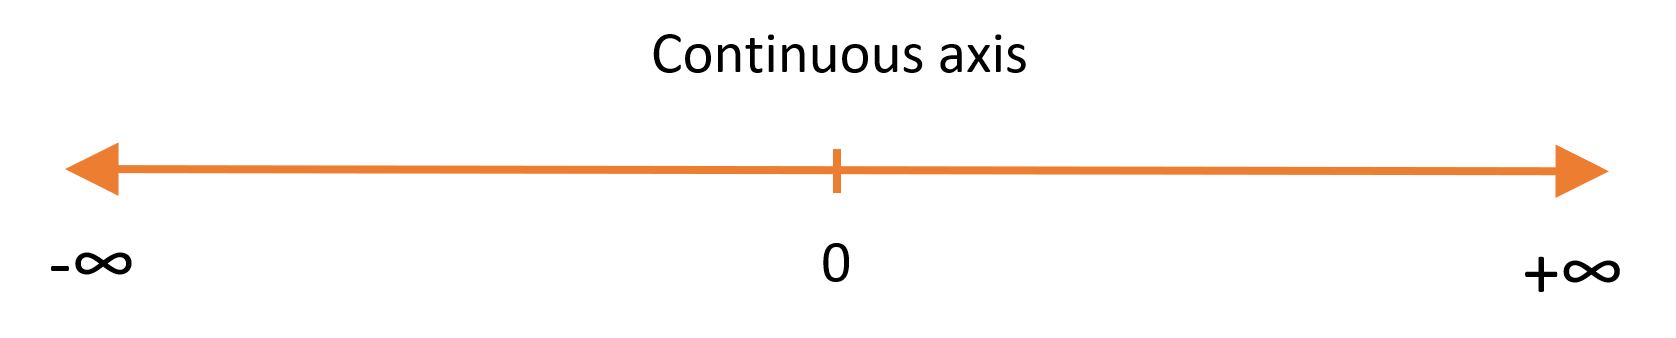 Continuous axis